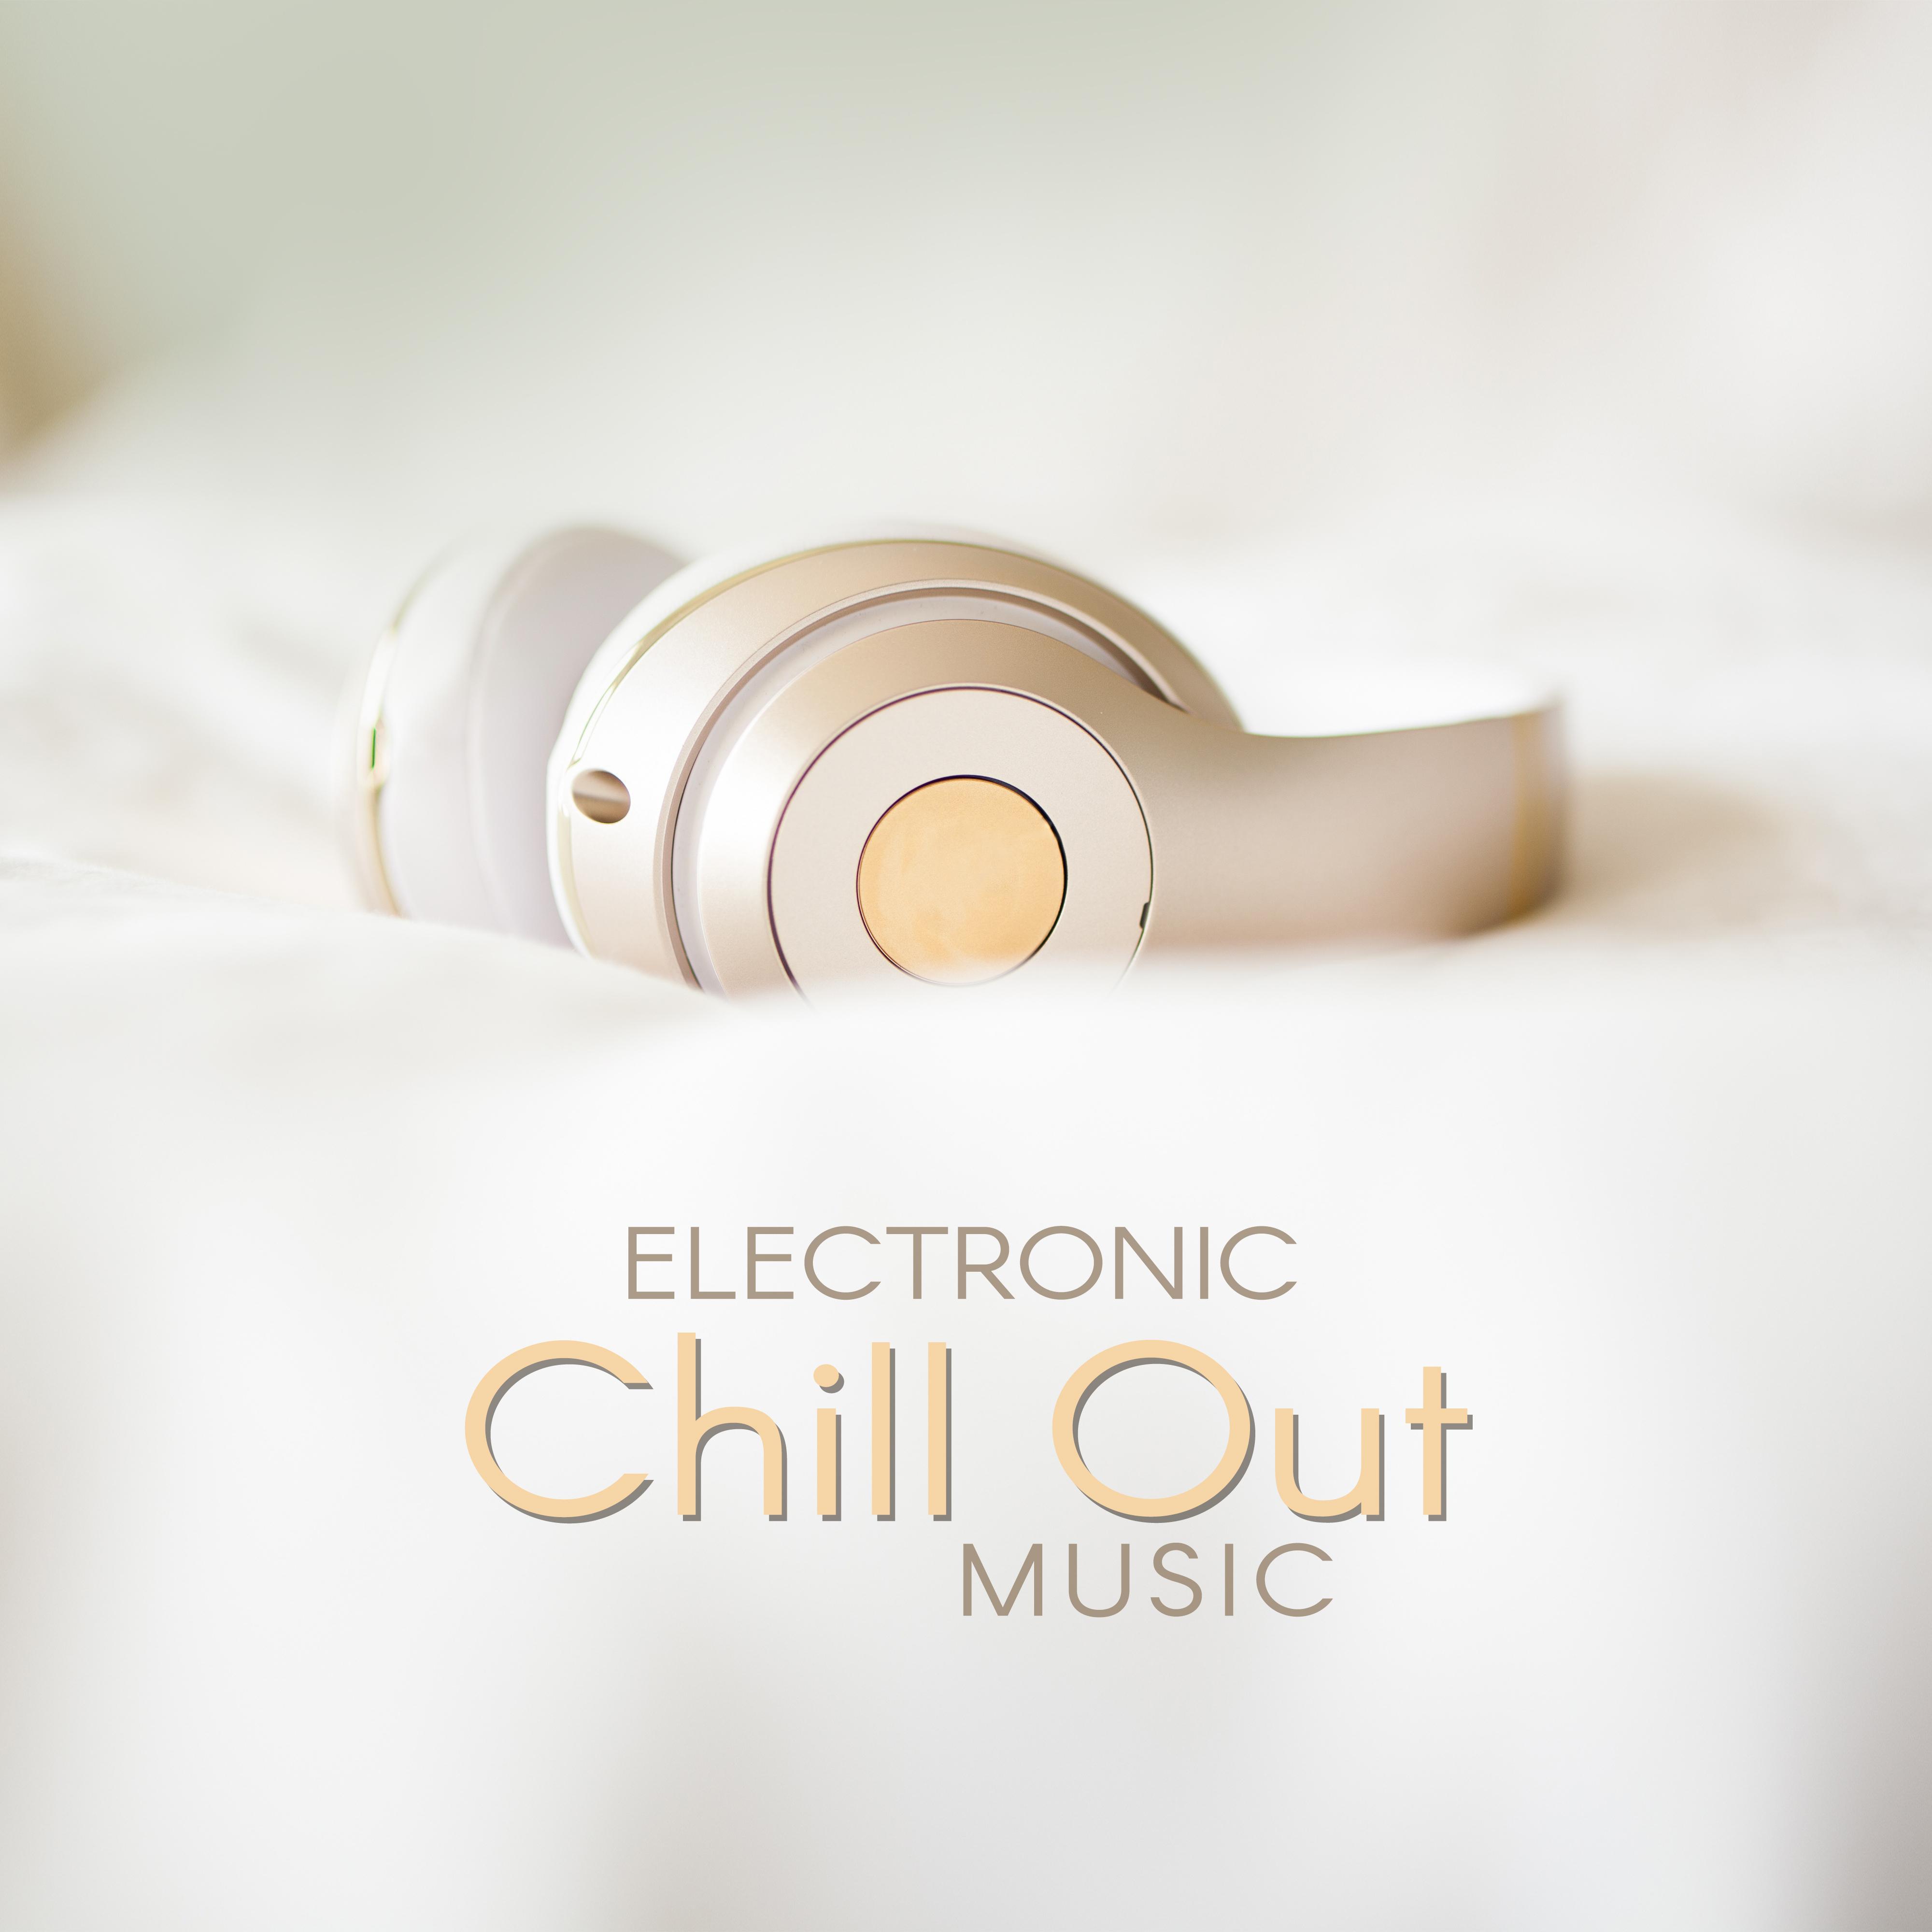 Electronic Chill Out Music – Summer Rest, Easy Listening, Peaceful Chill Out, Stress Relief, Beach Lounge